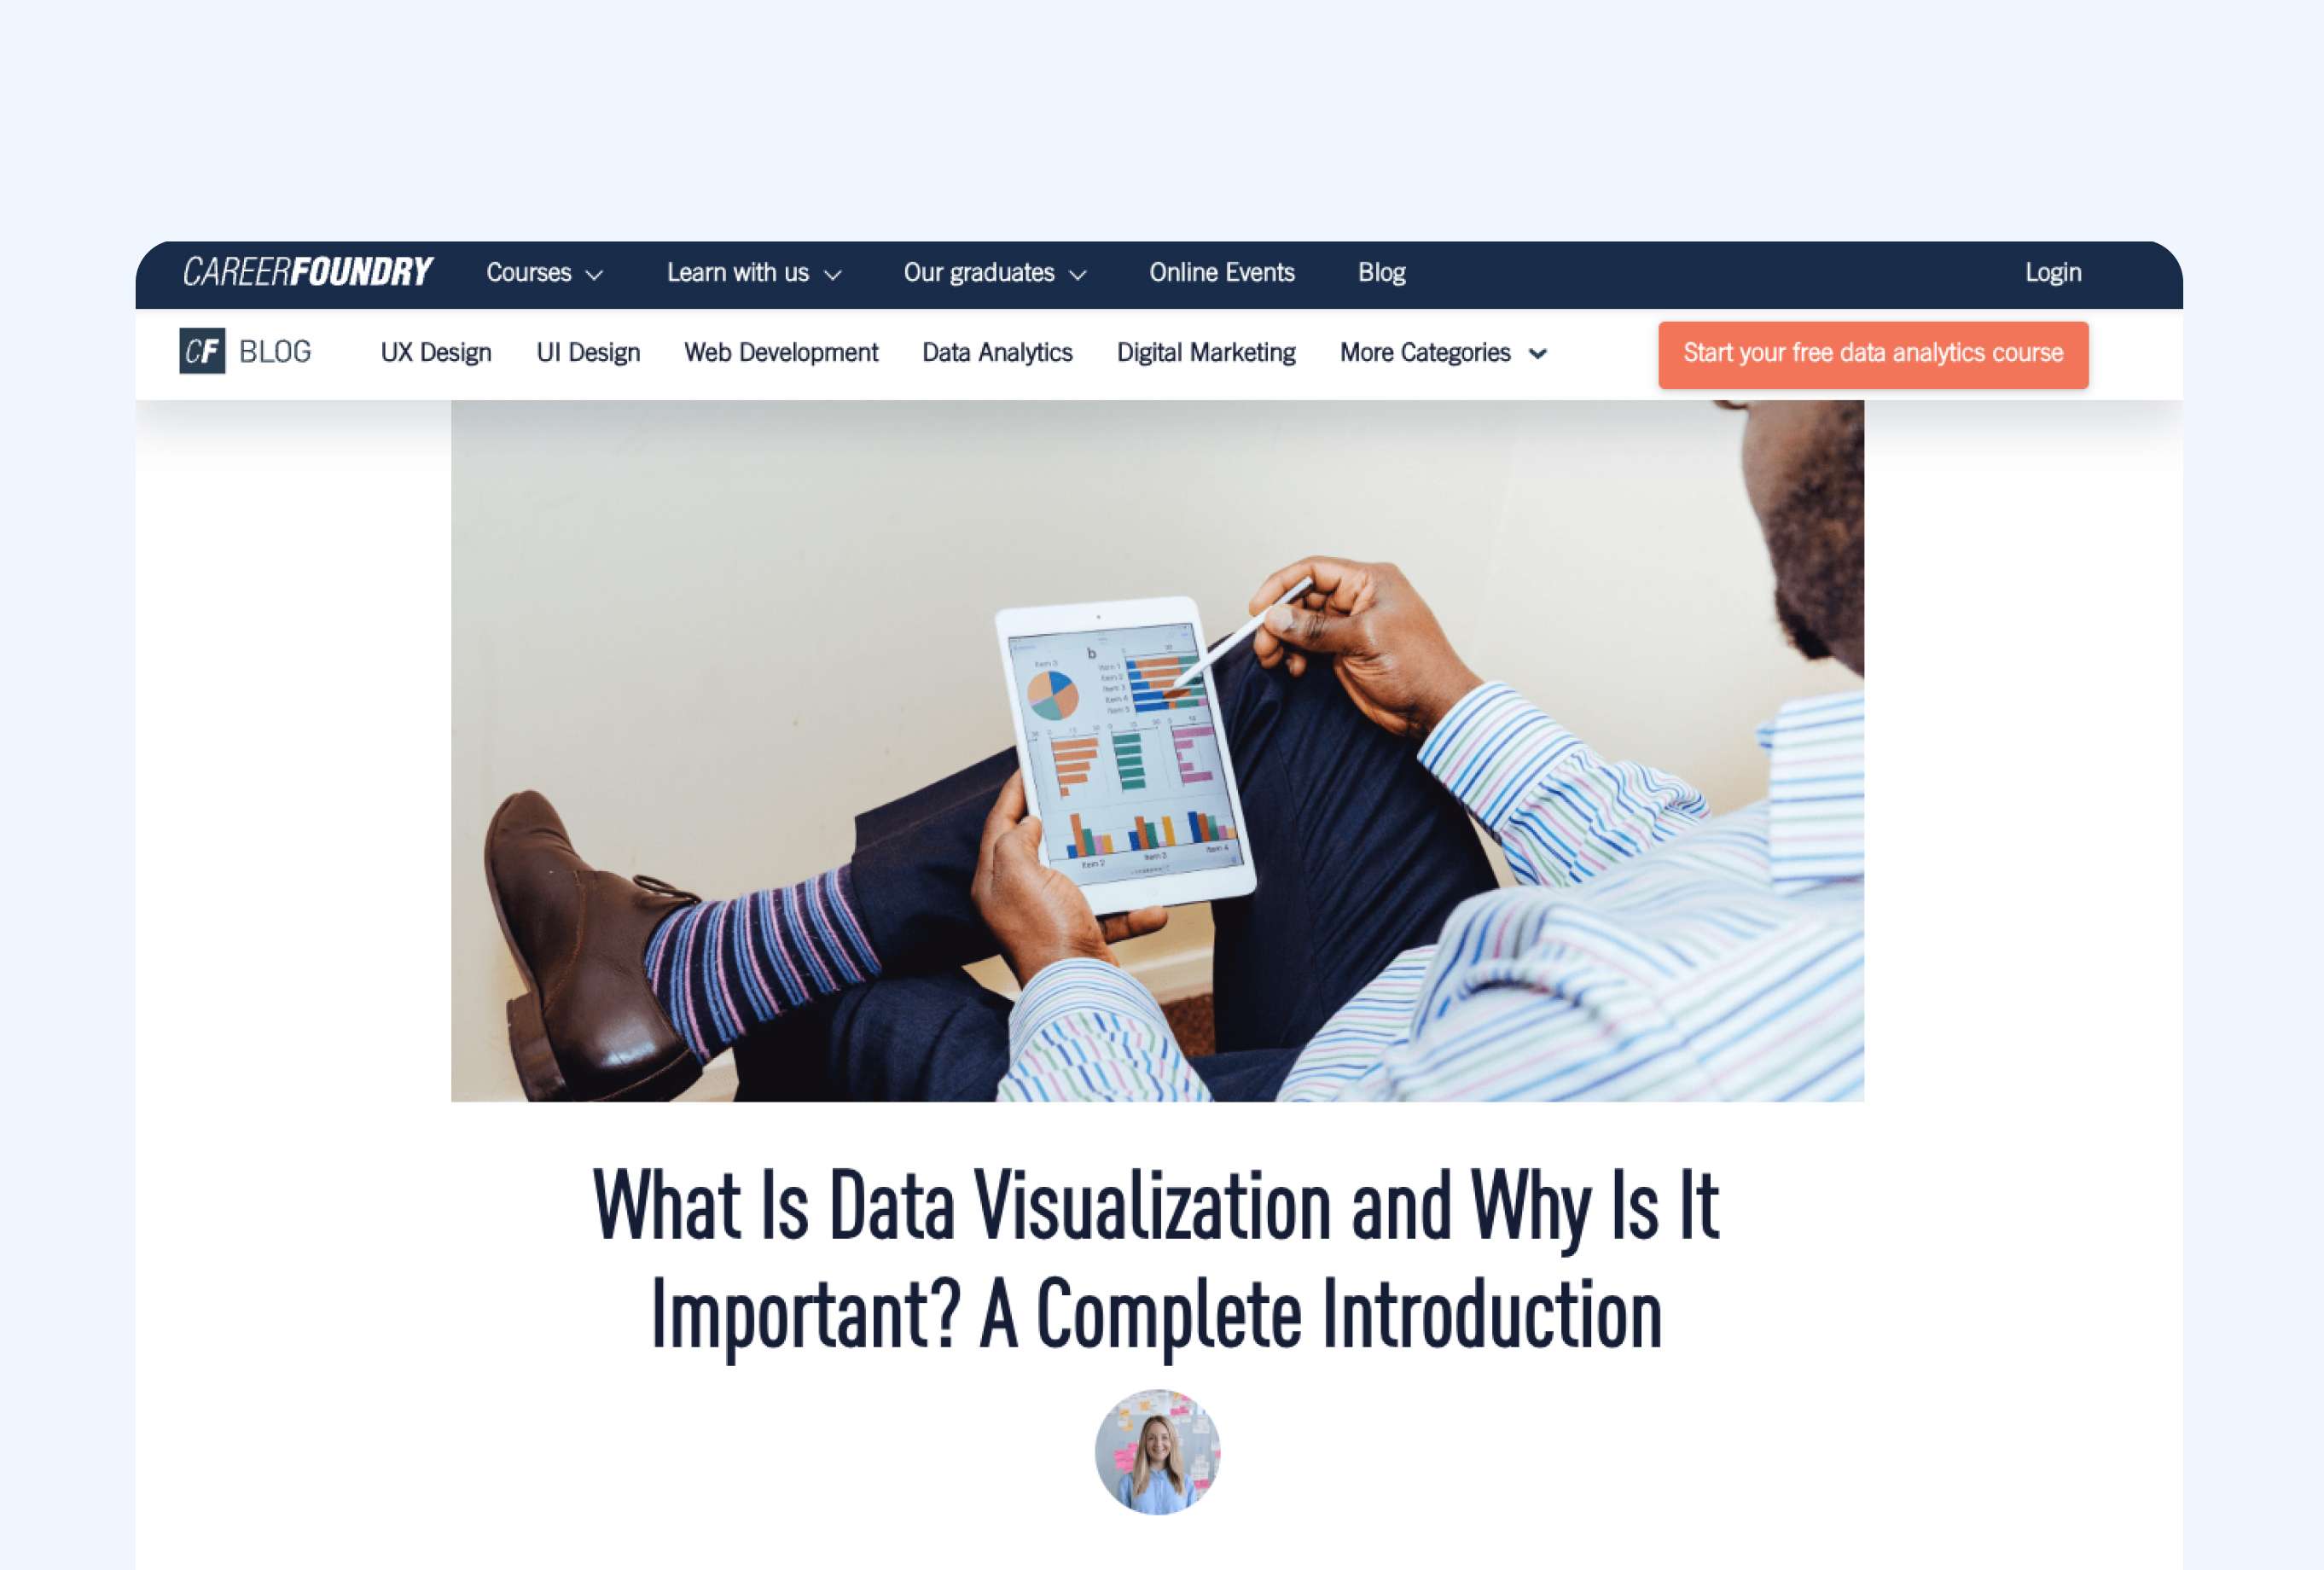 What Is Data Visualization And Why Is It Important?